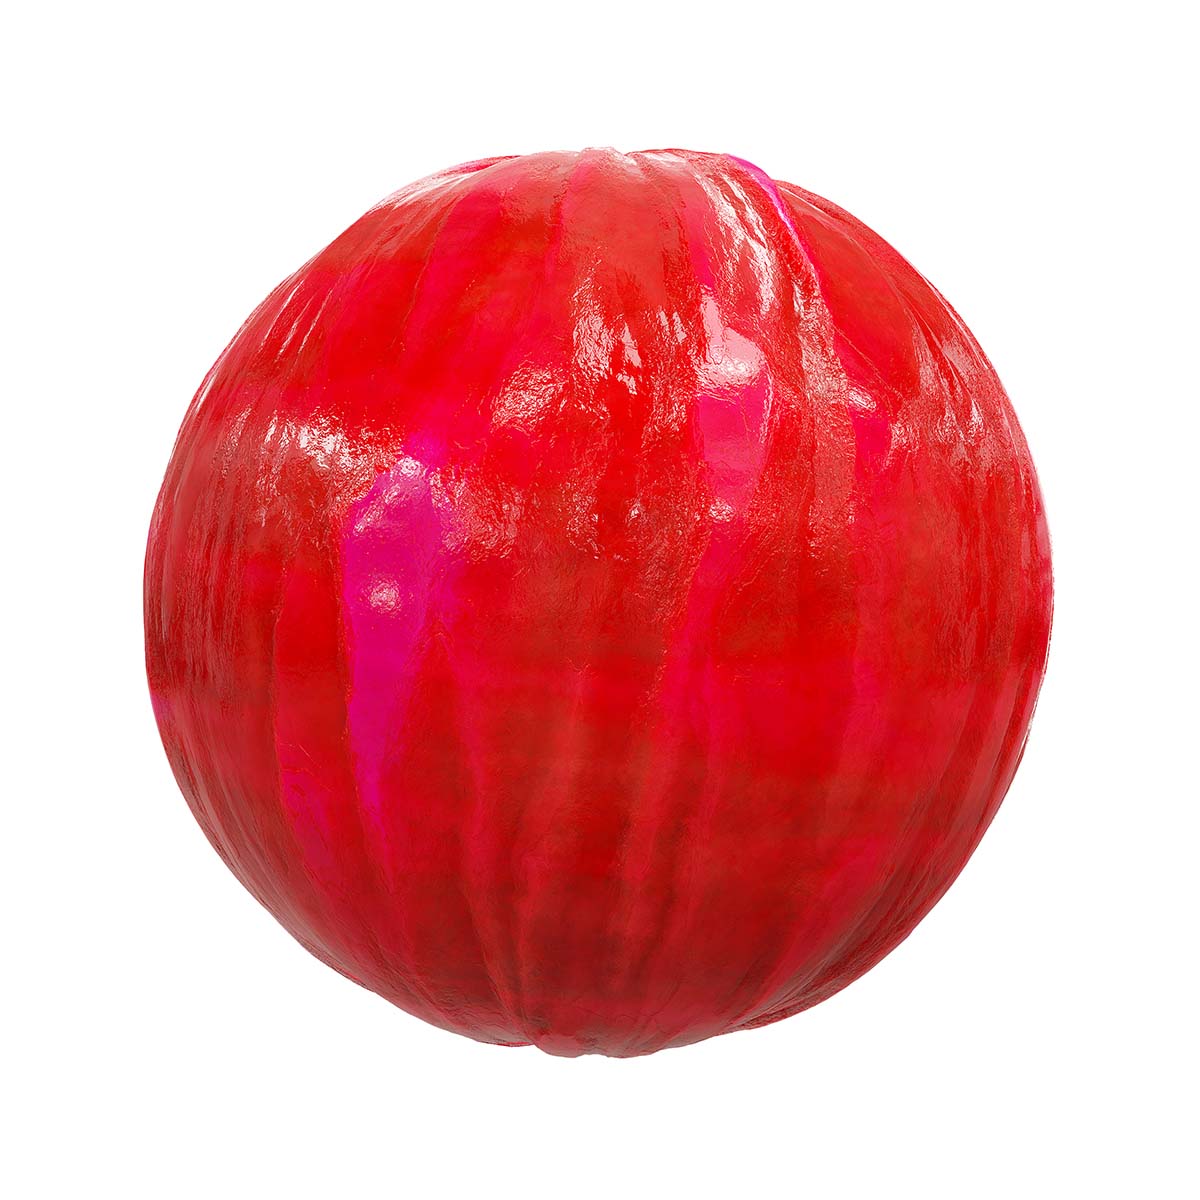 Red Crystal PBR Texture